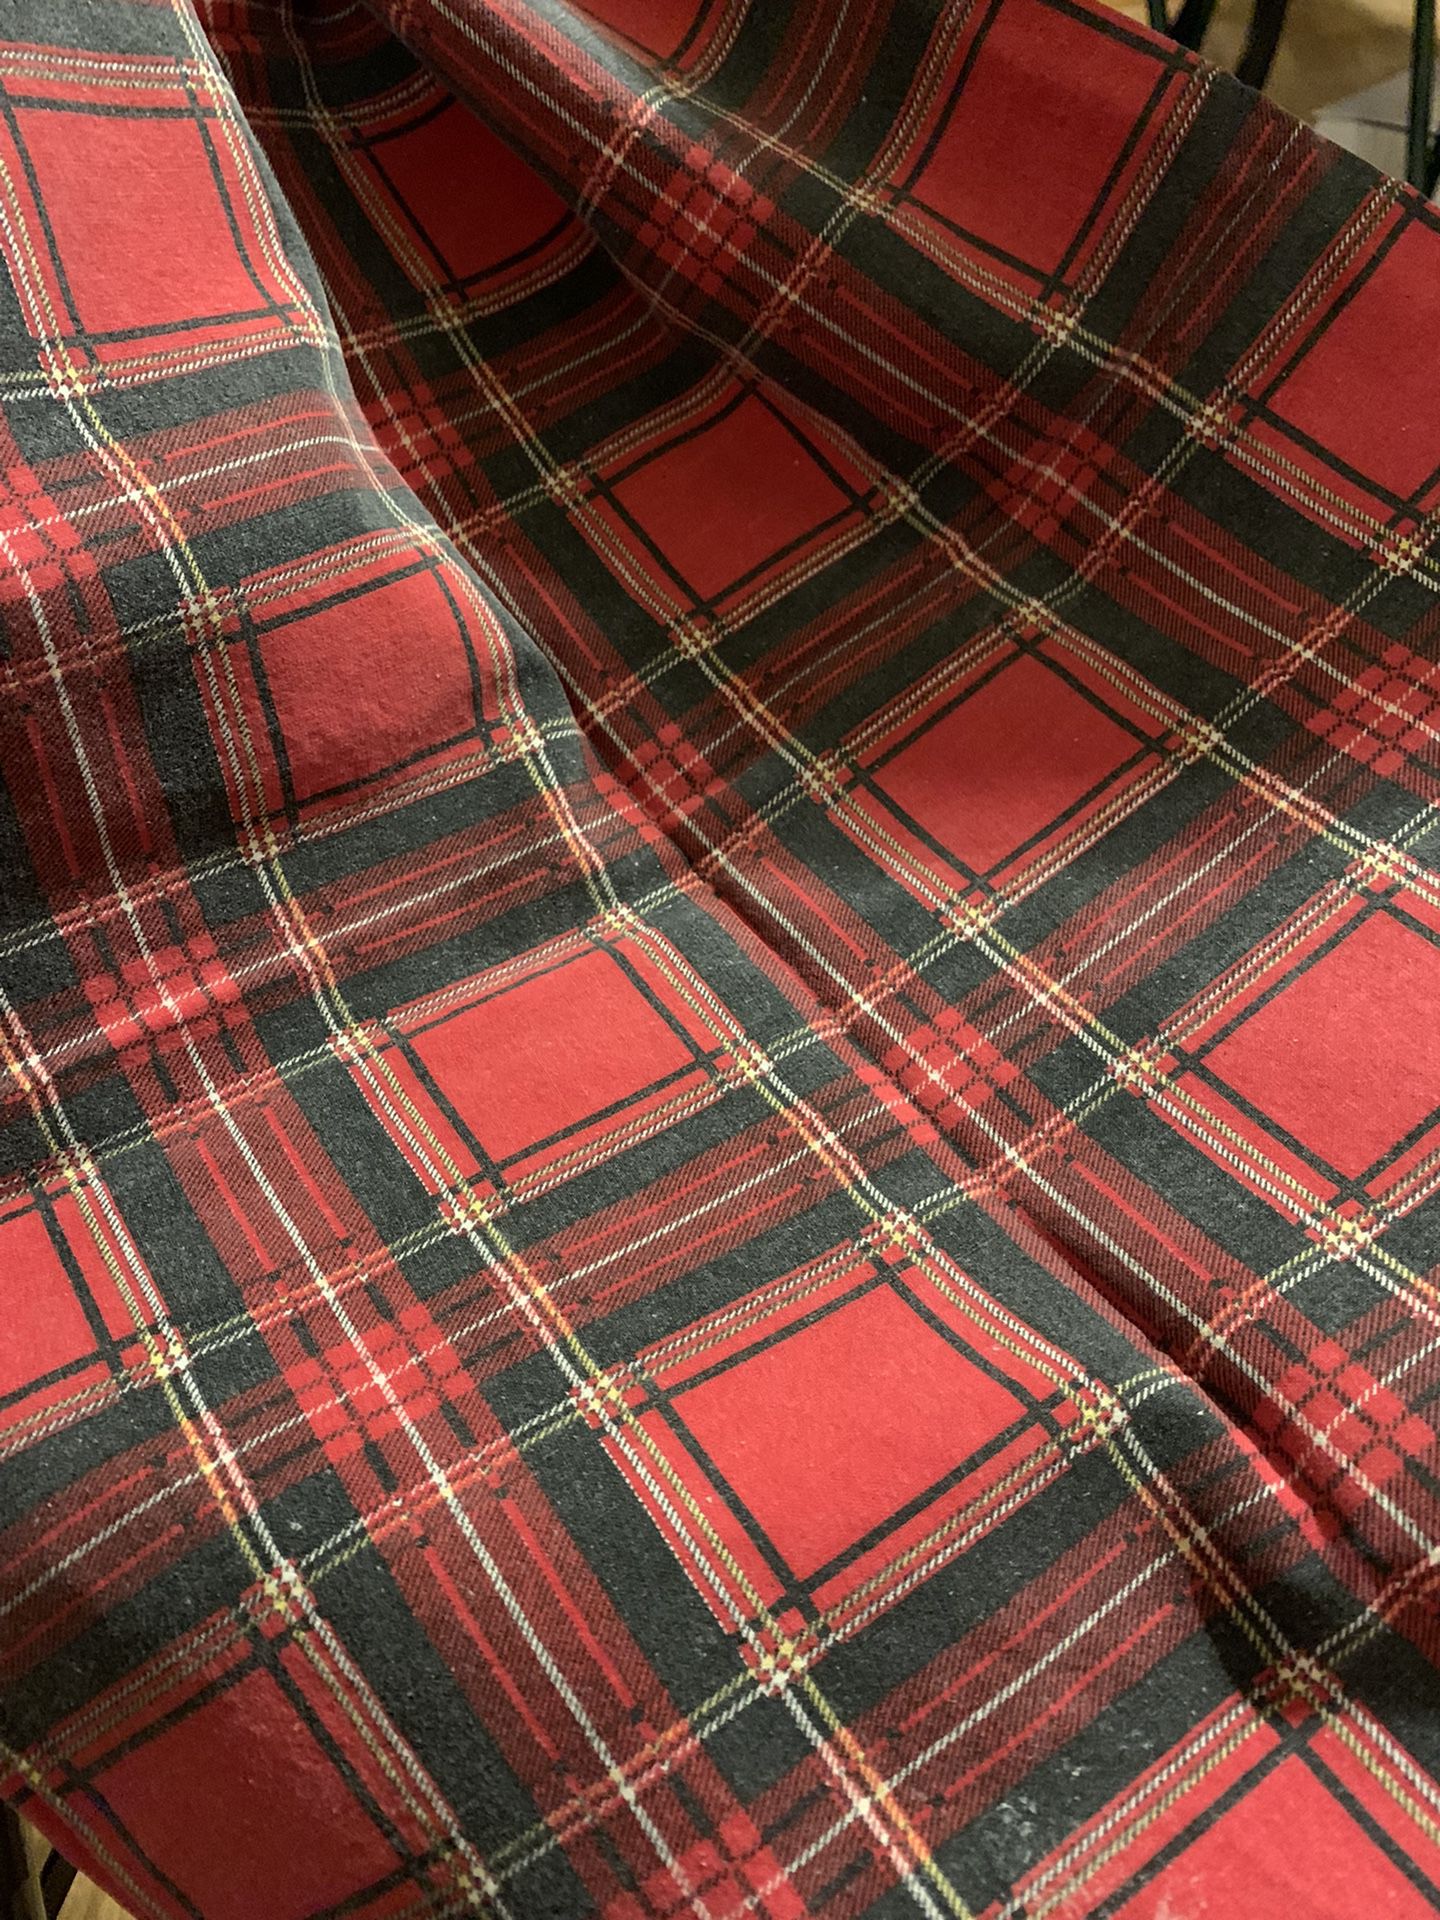 D-21  Dog Bed Cover  Ex-Large 30"x40"  Red plaid  $20